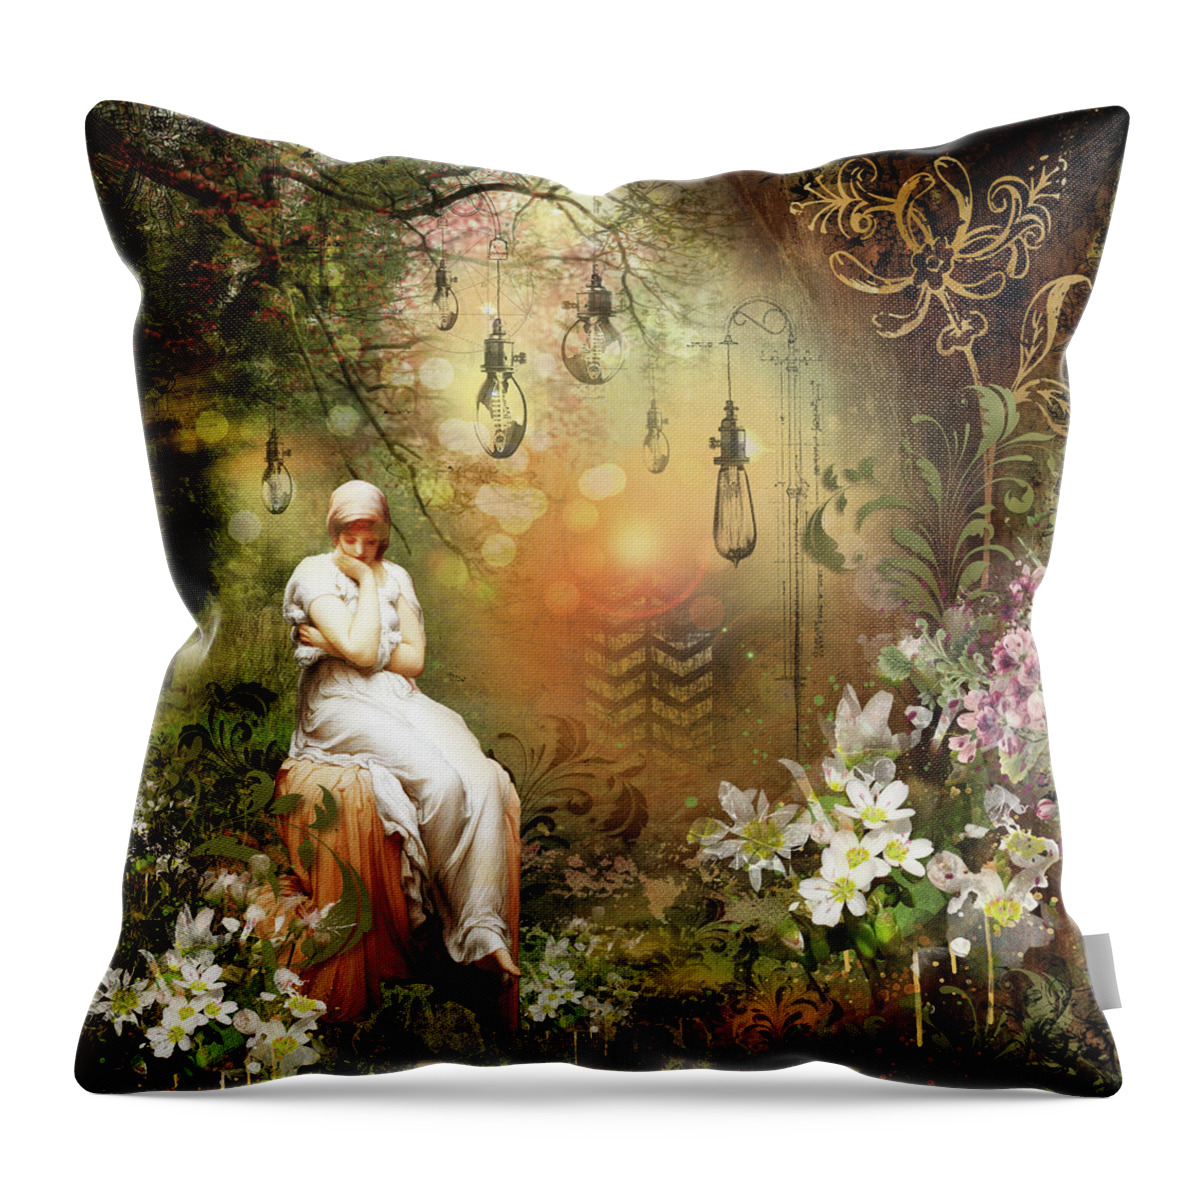 Inspiration Throw Pillow featuring the photograph Inspiration by Carla Parris